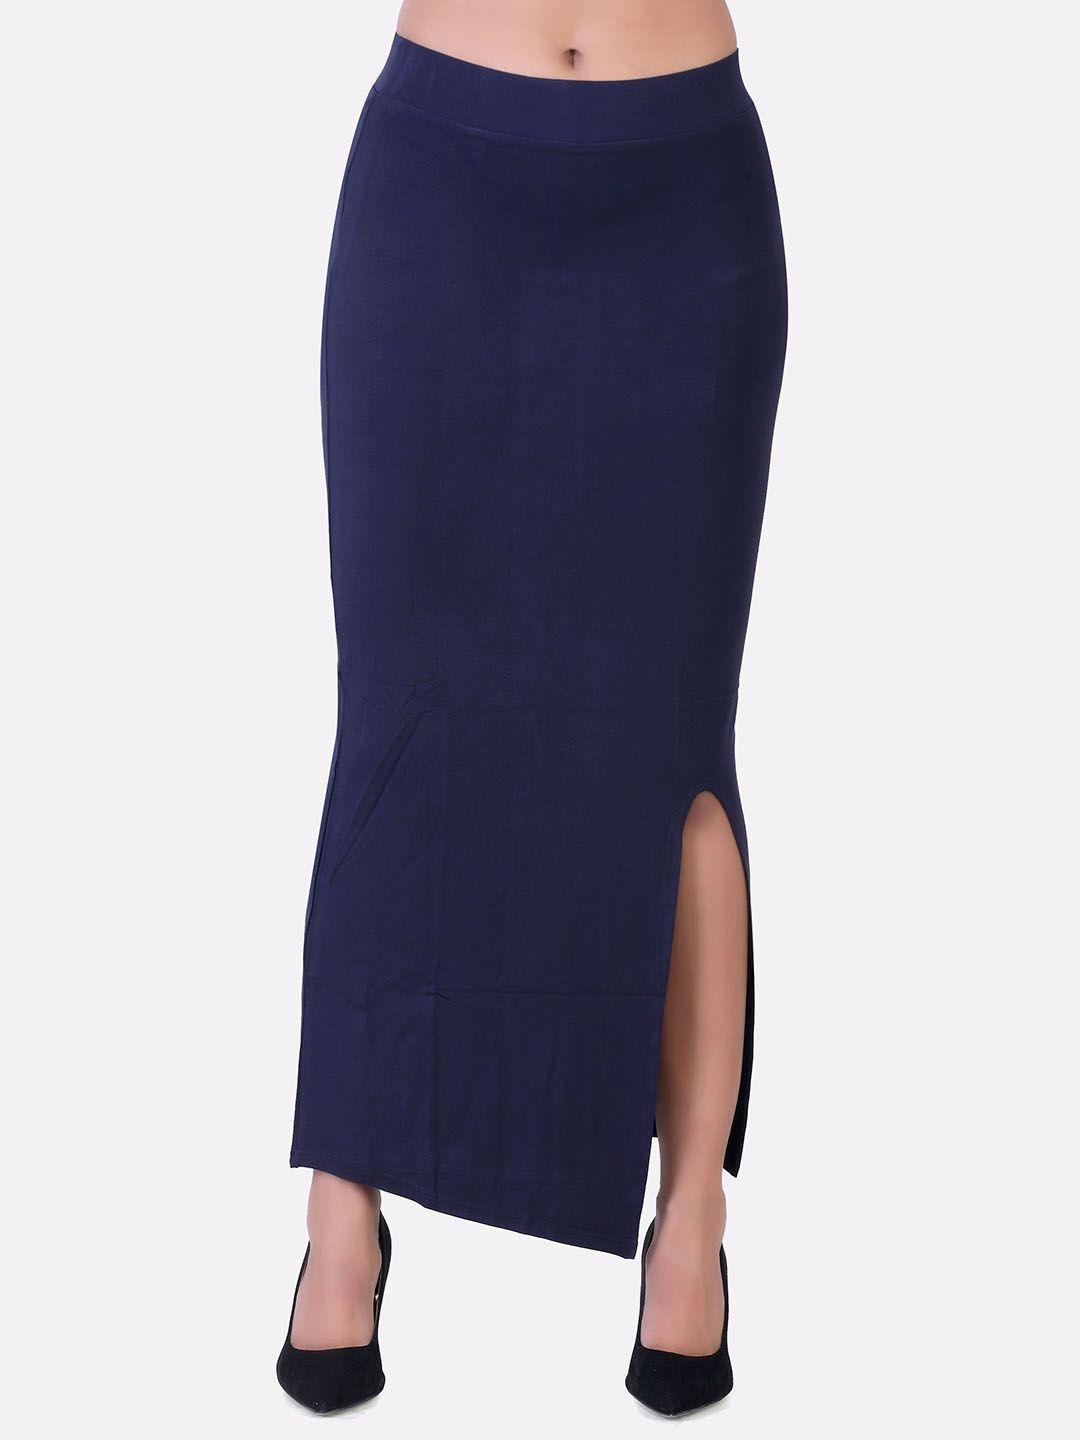 laasa  sports woman navy blue mid calf pencil skirt with side slit